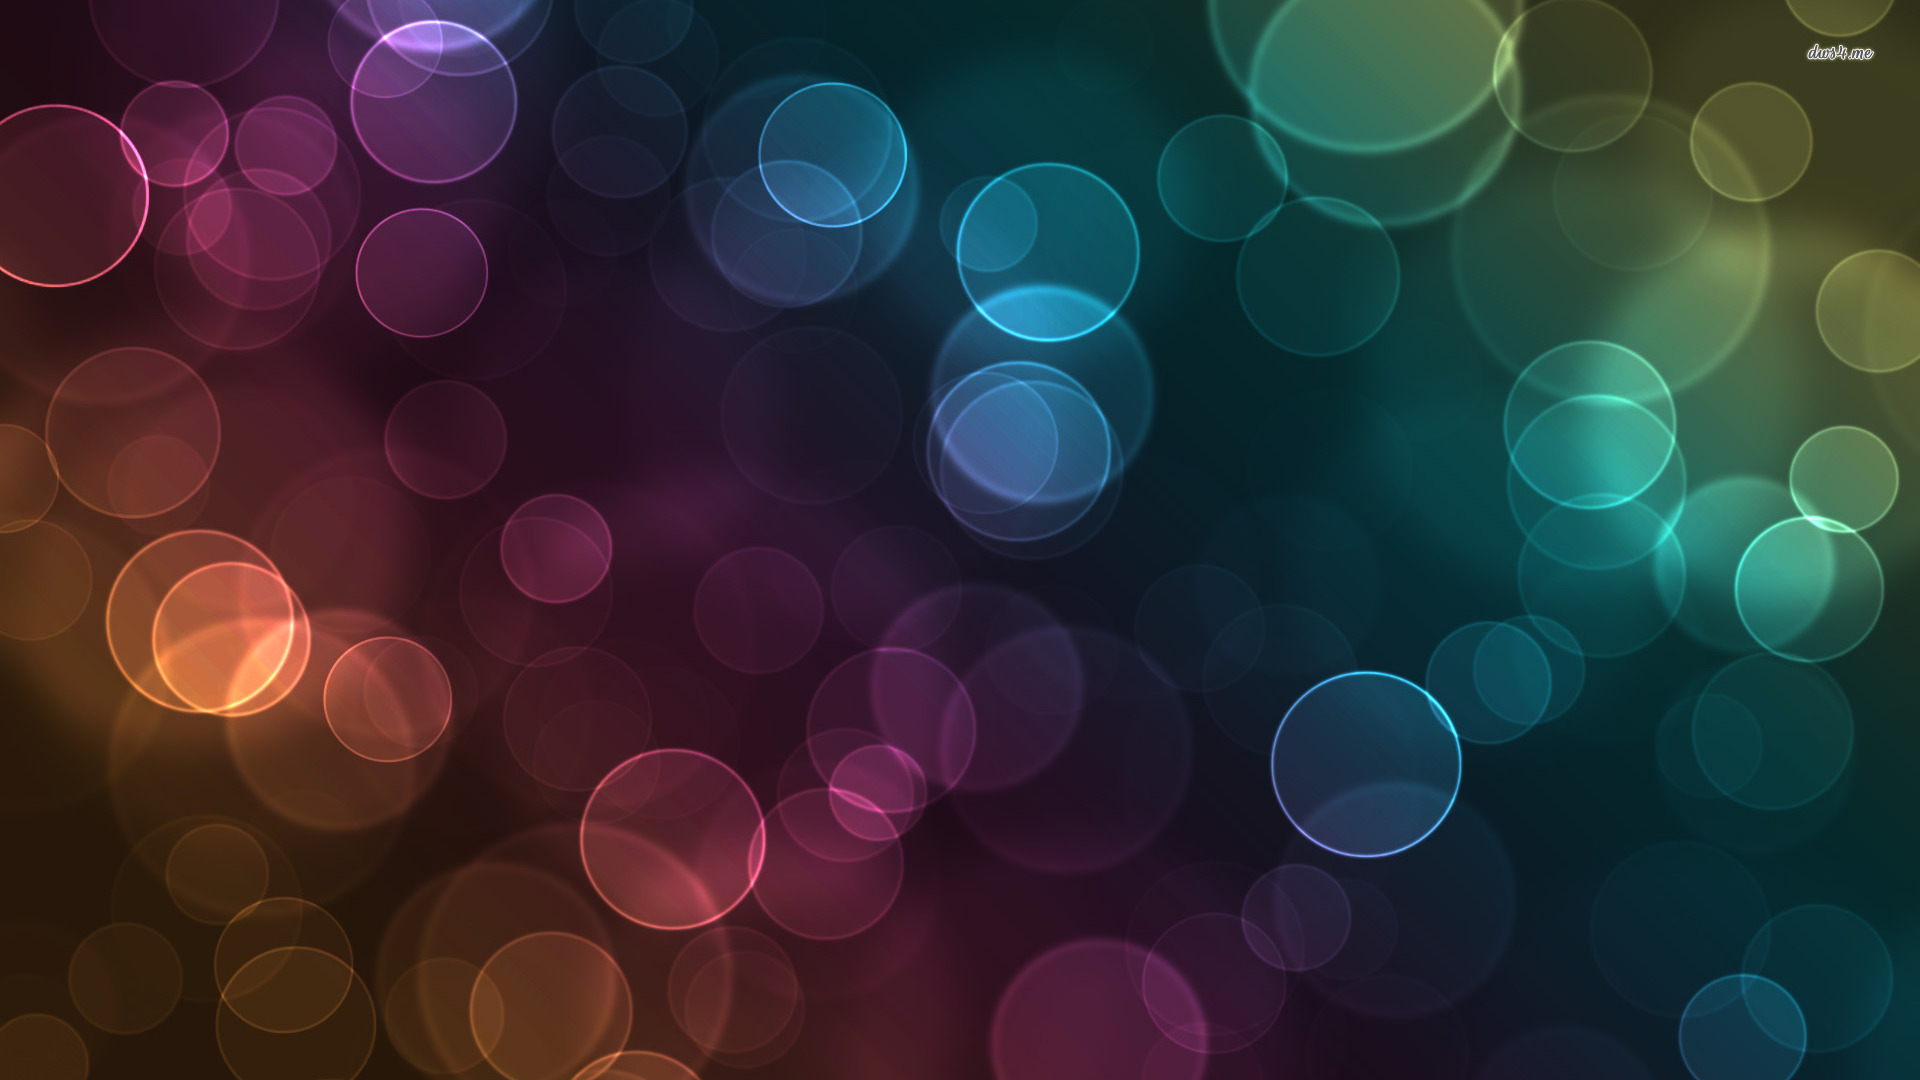 Blurry Bubbles Wallpaper Abstract